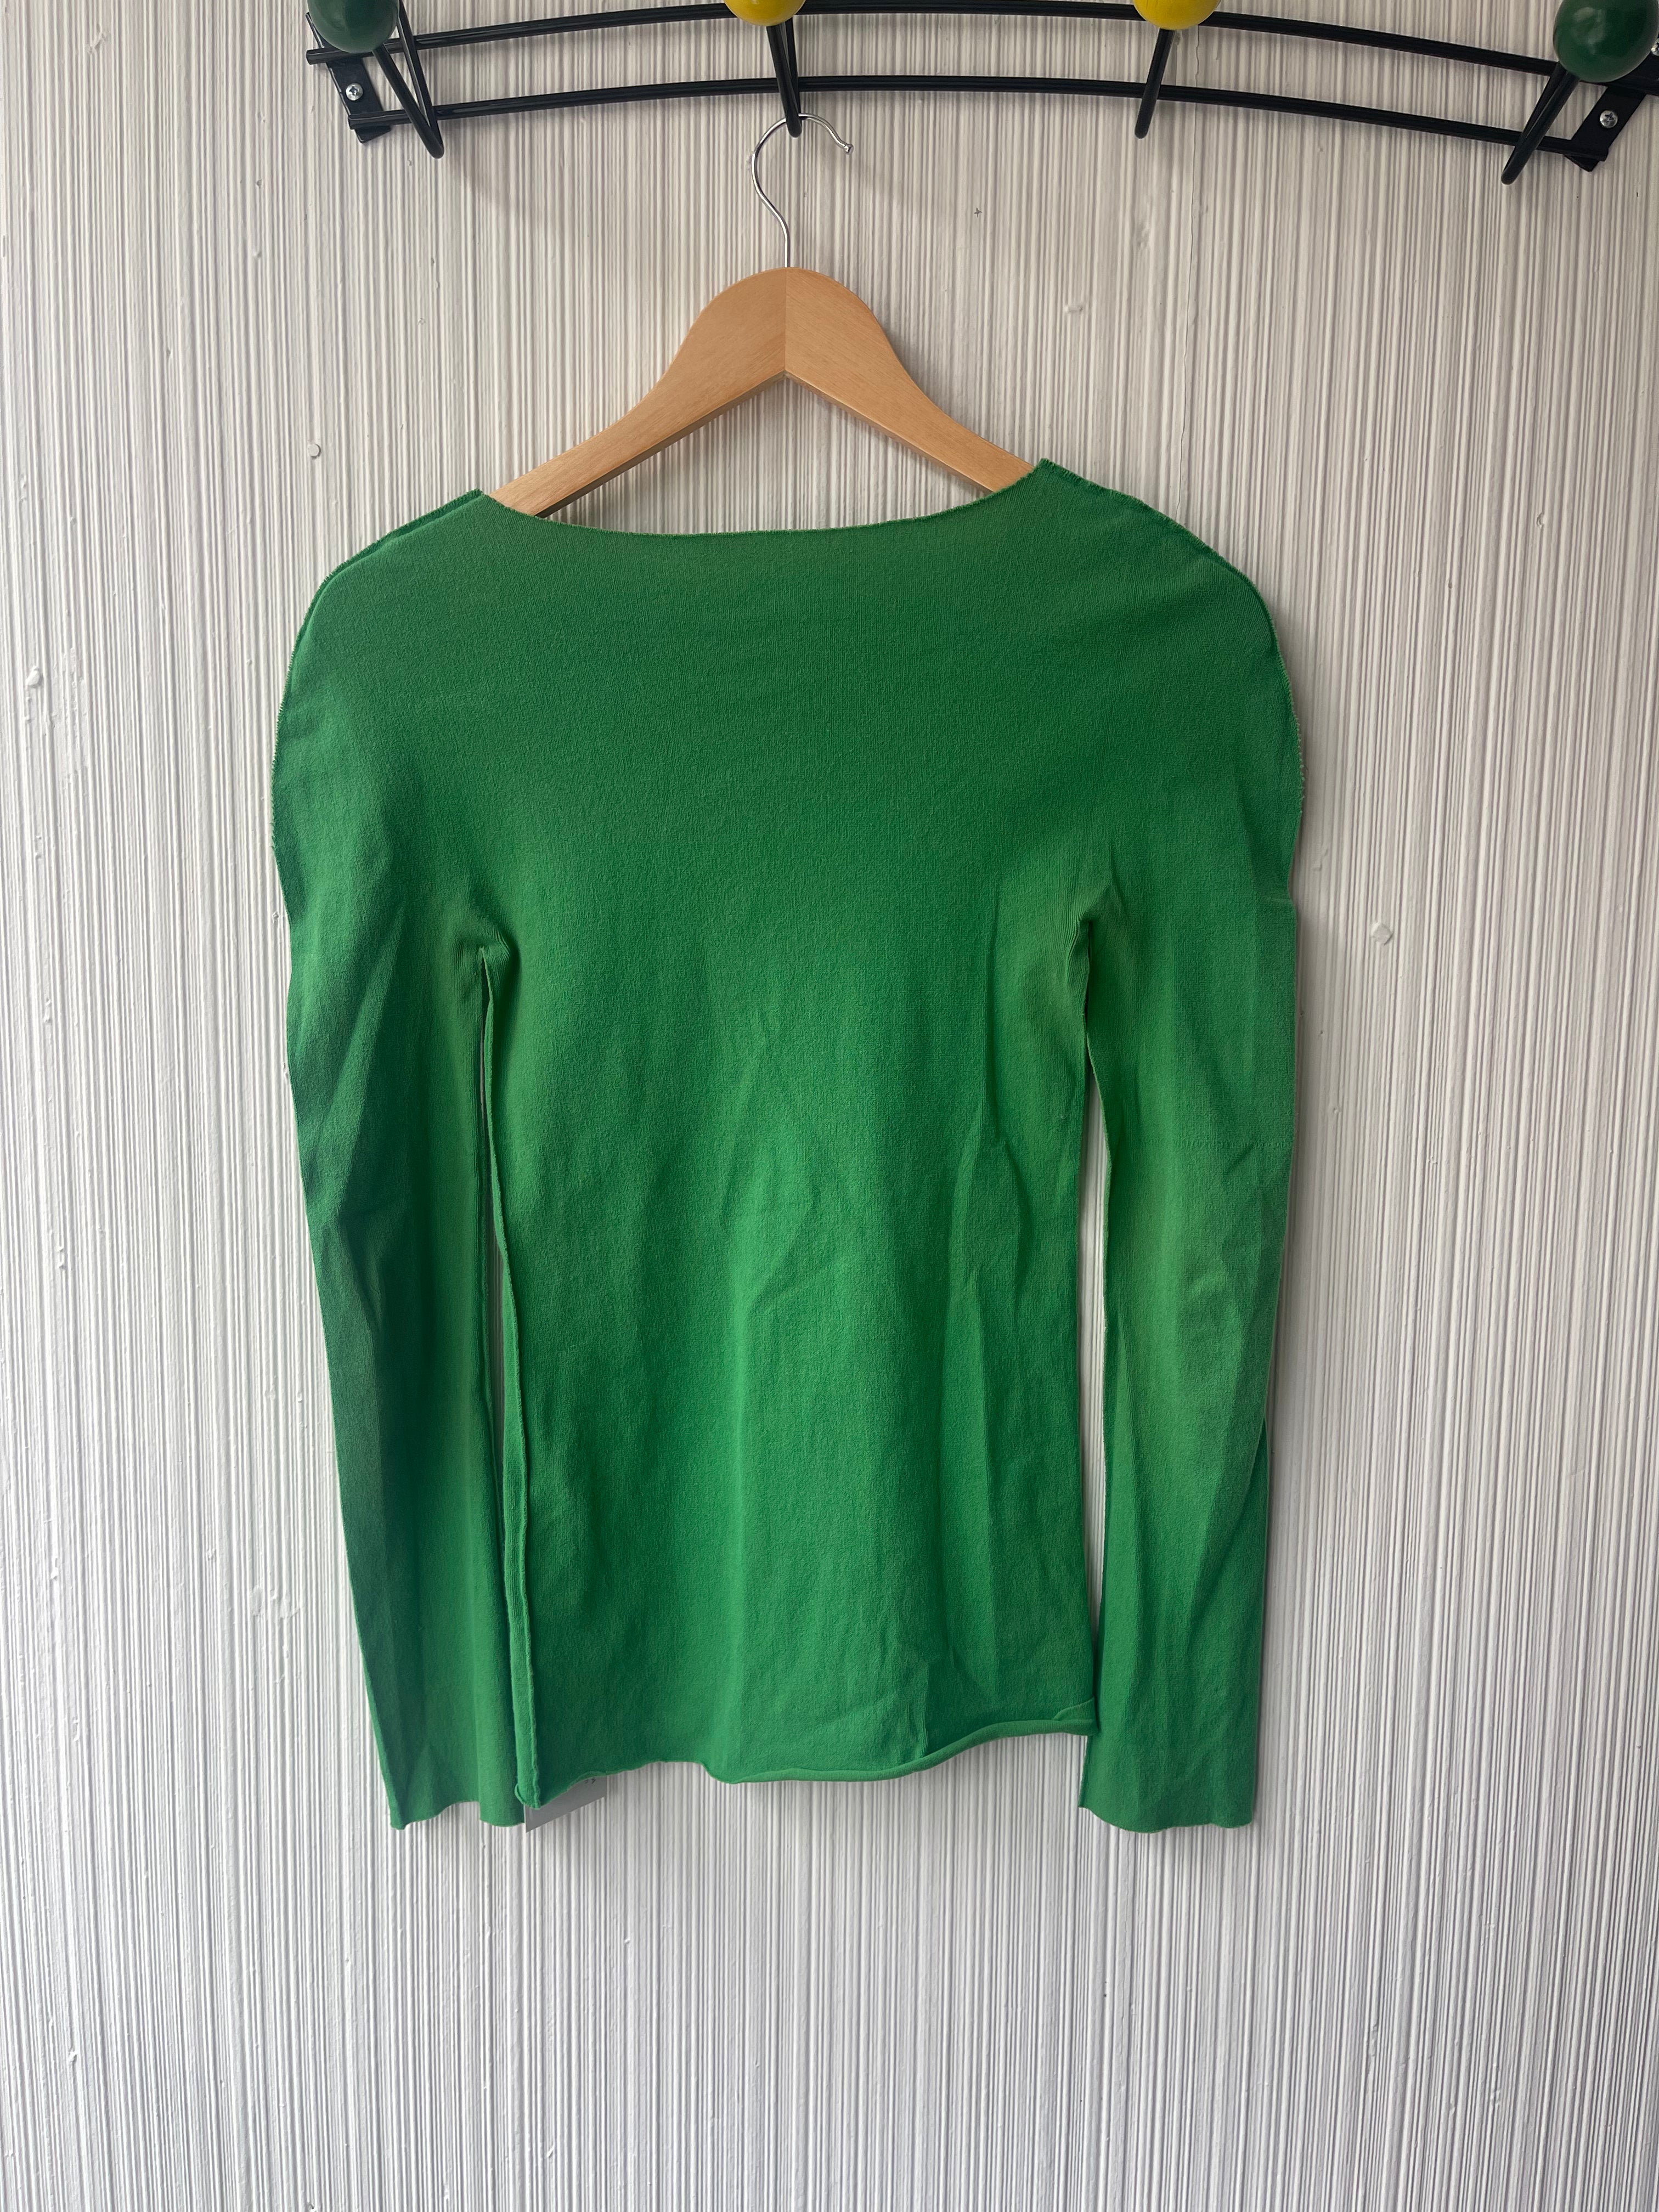 Issey Miyake APOC green woven net neck top